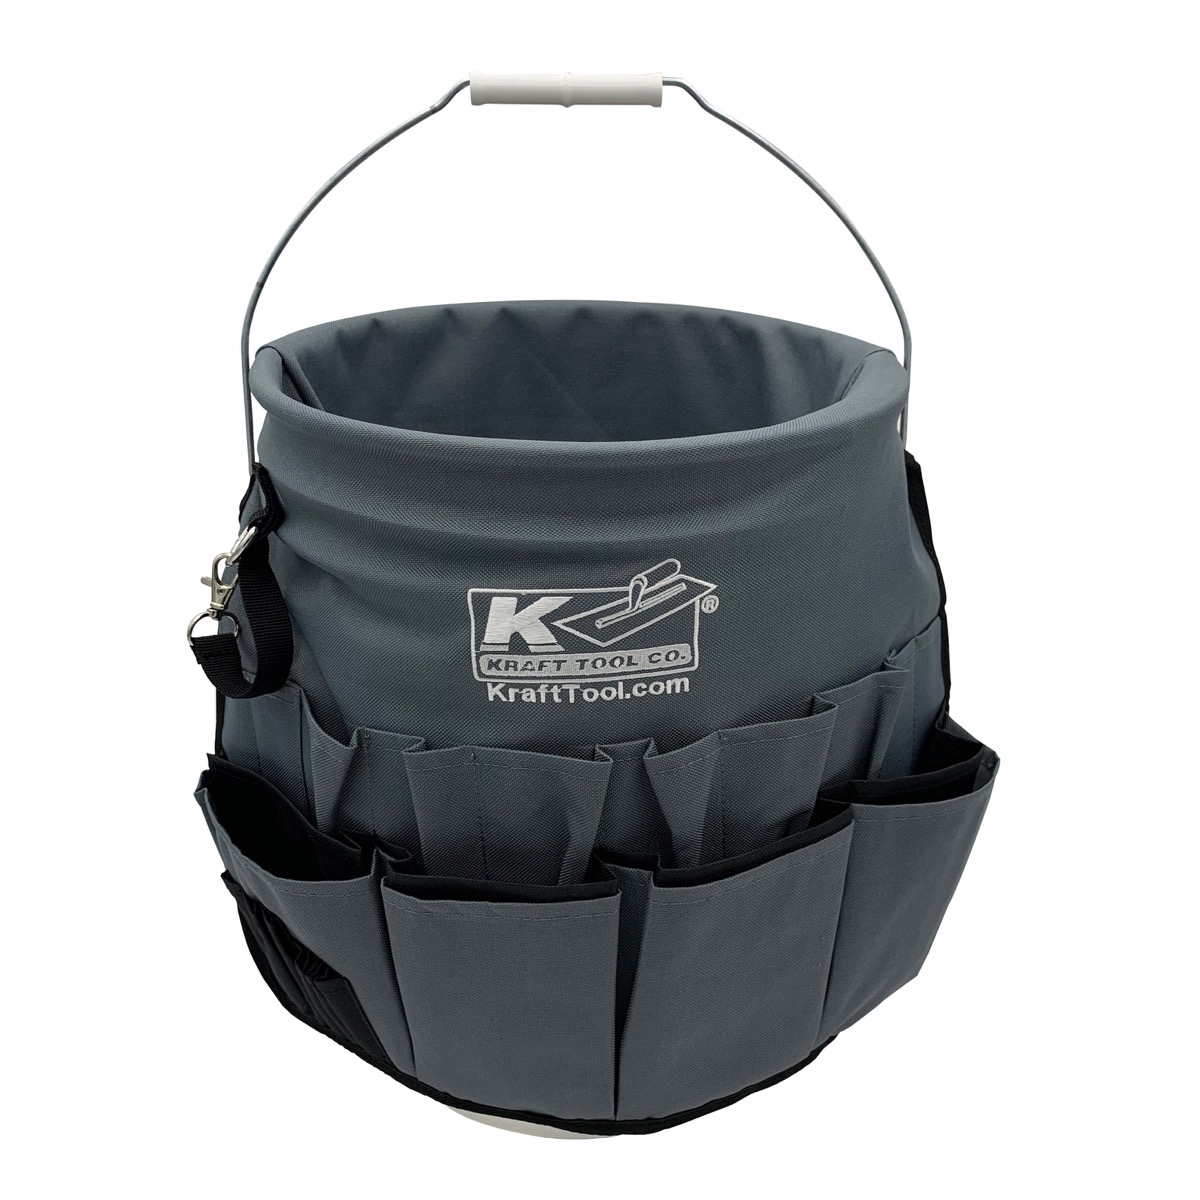 Bucket Bag for holding all your tools, available from Speedcrete.